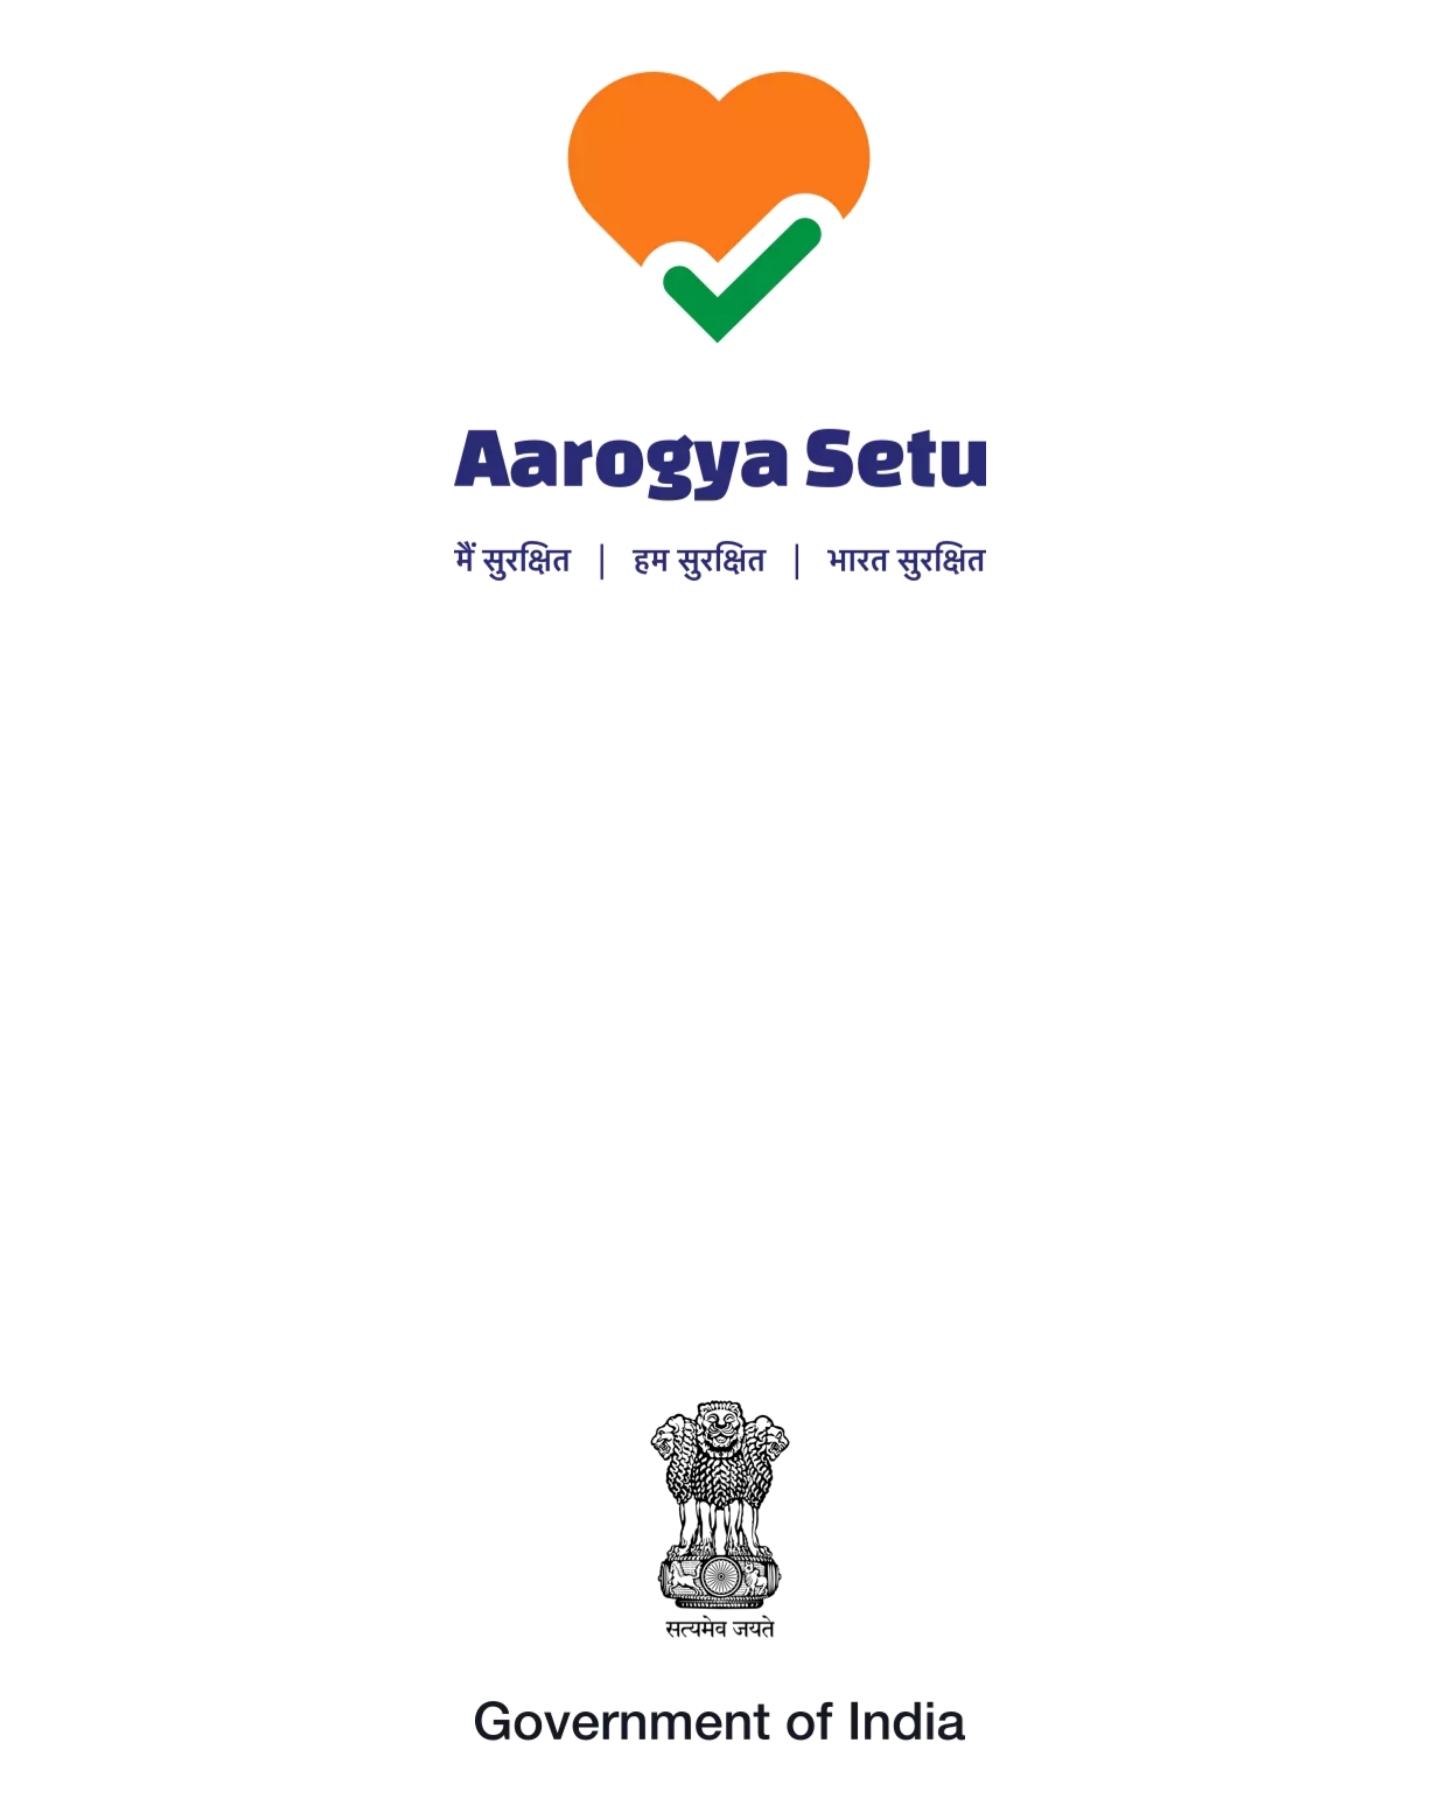 aarogya setu app: How to download and use government's official ...